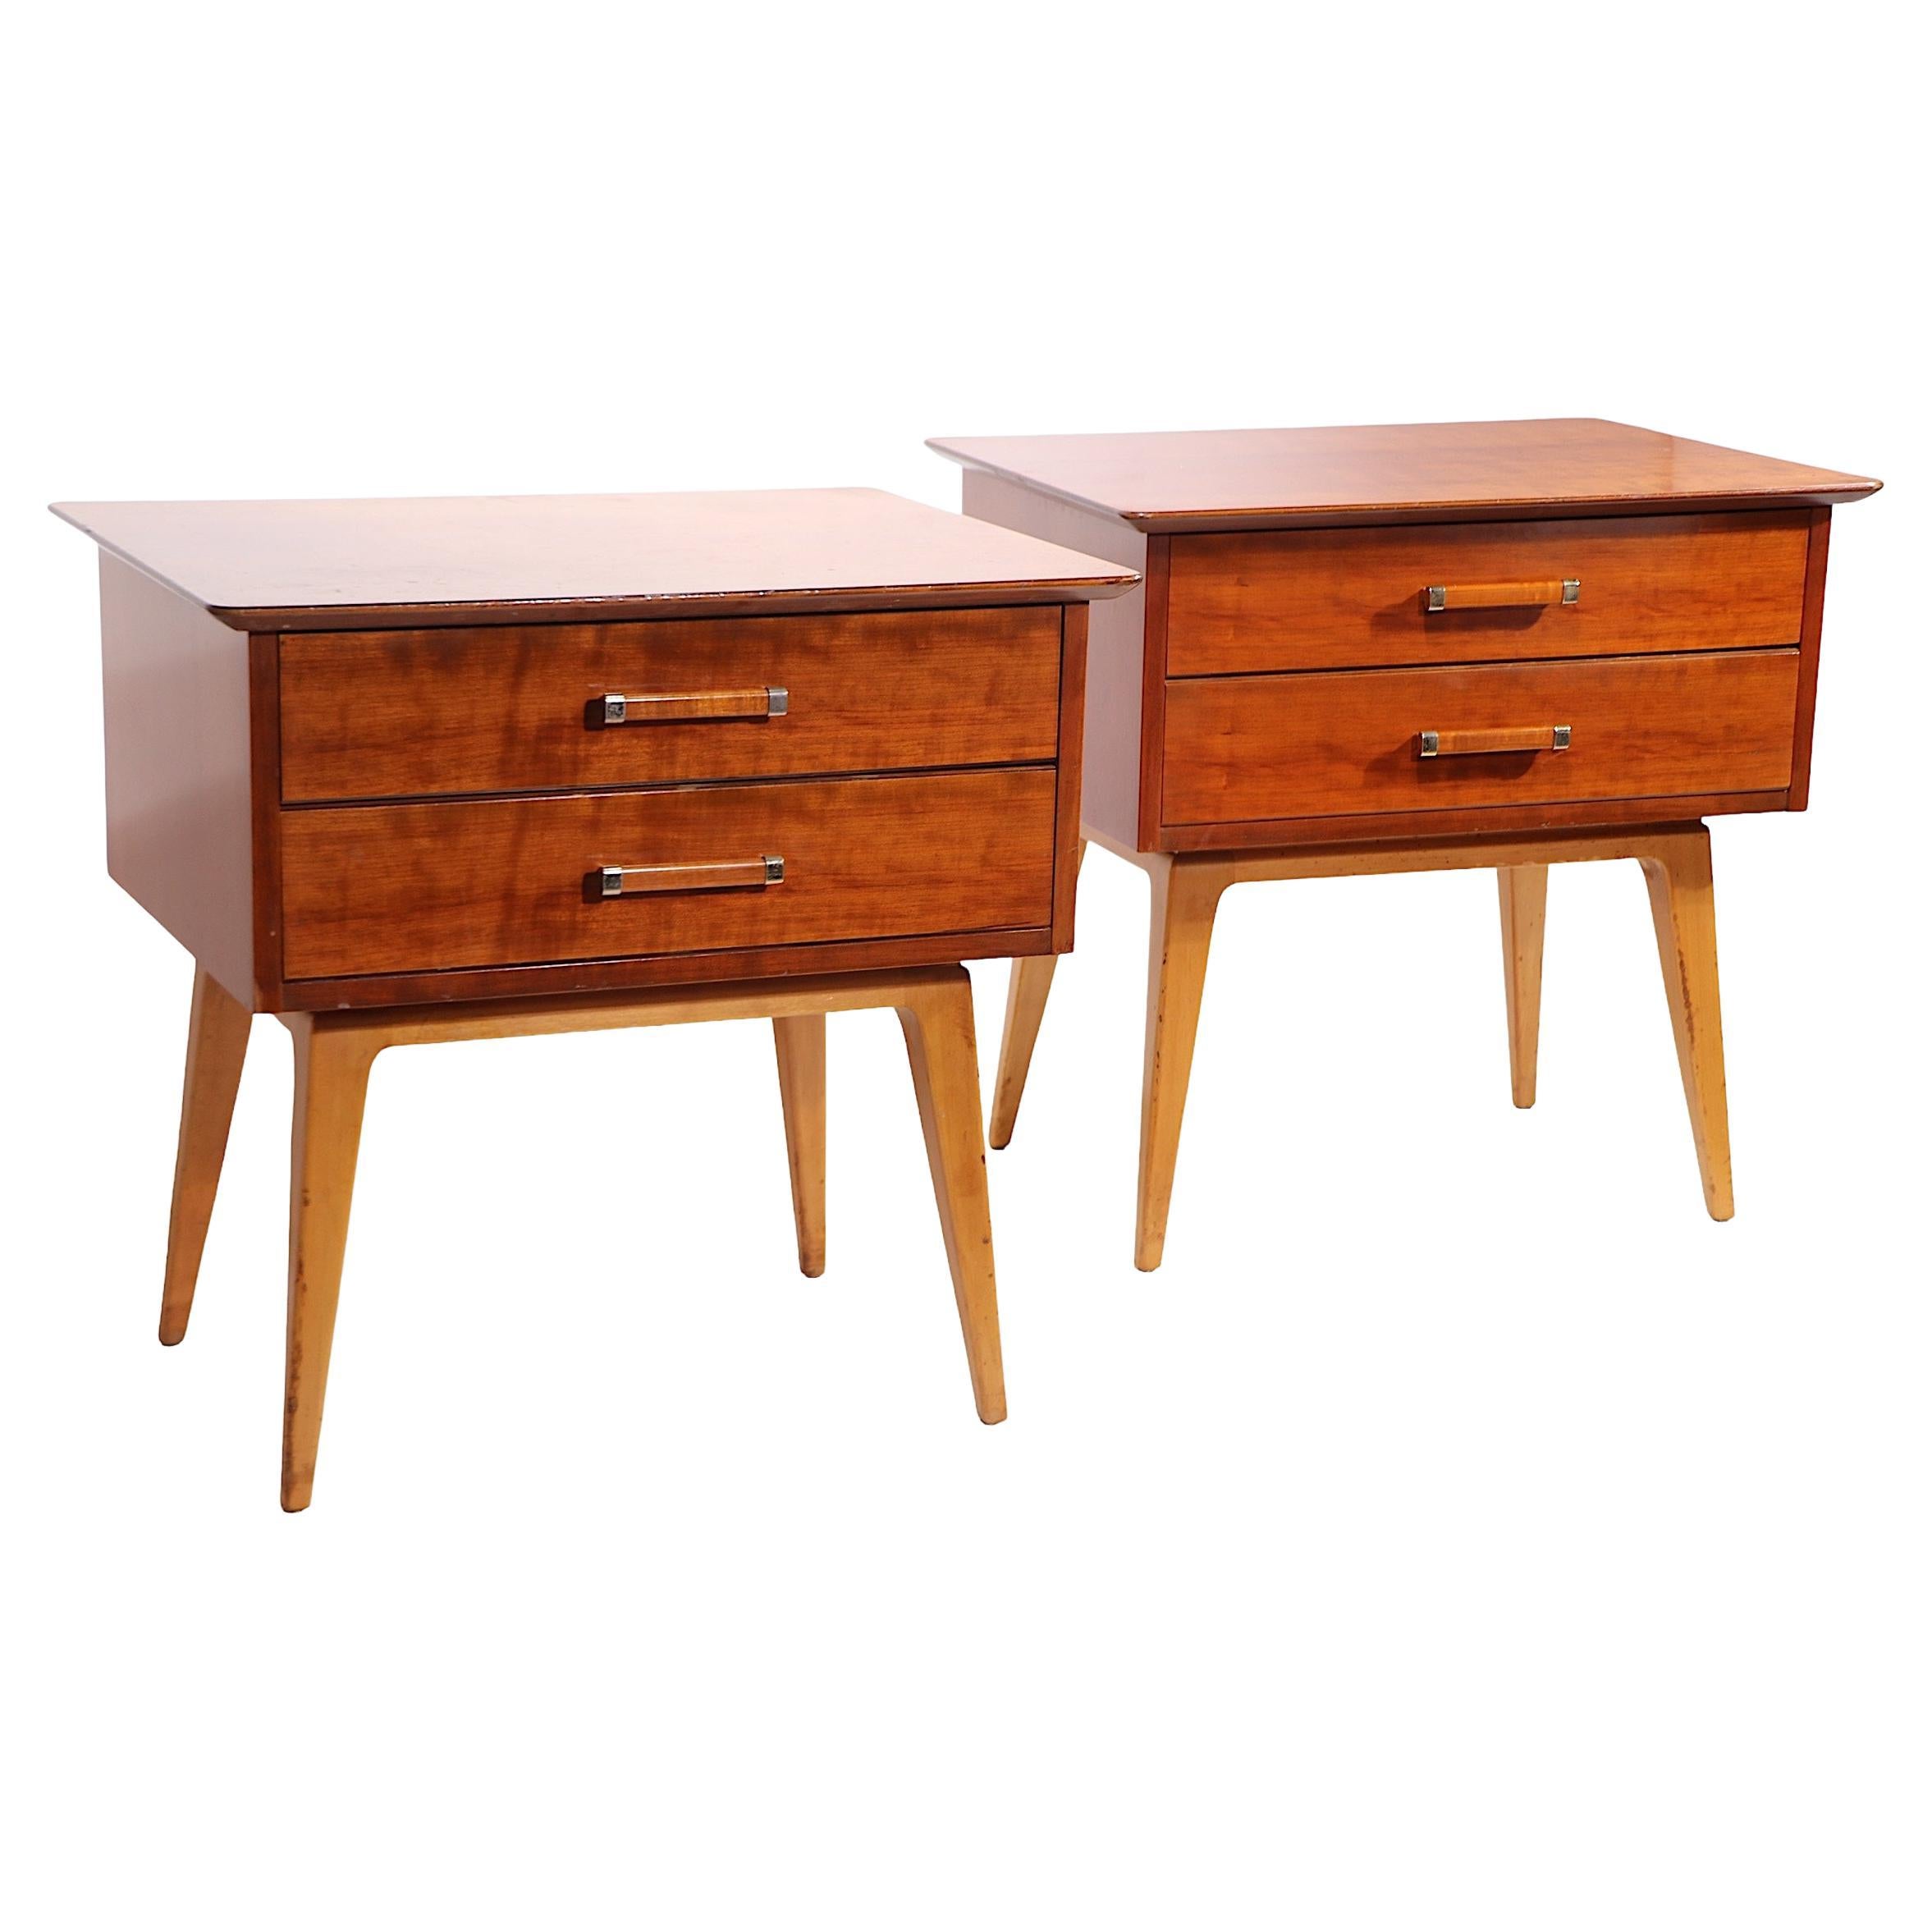 Pr. Mid Century Nightstands by Renzo Rutili for Johnson Furniture Co. c 1960's